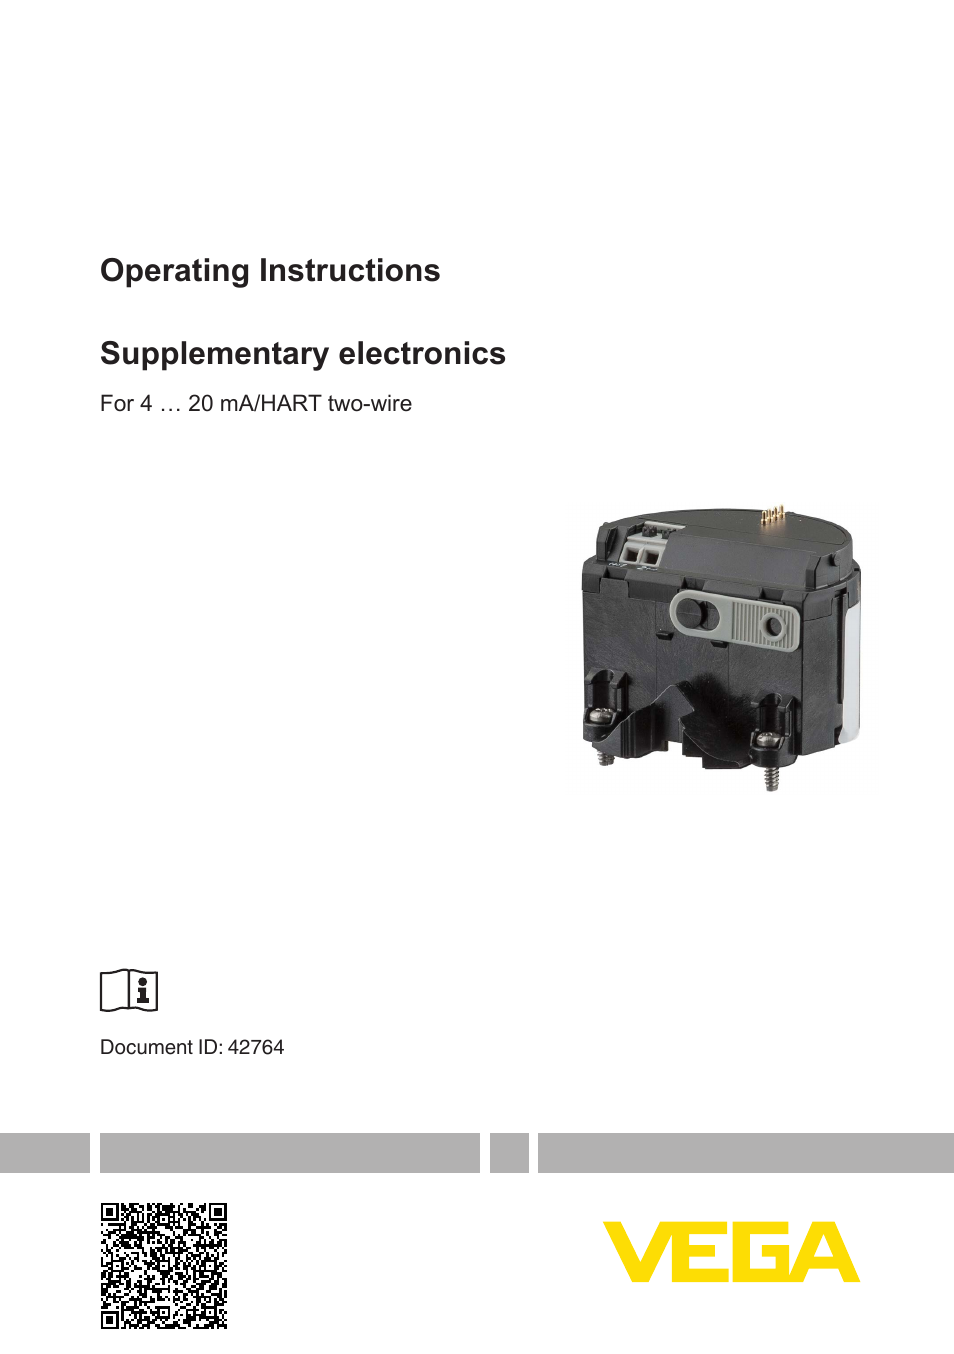 Supplementary electronics For 4 … 20 mA_HART two-wire